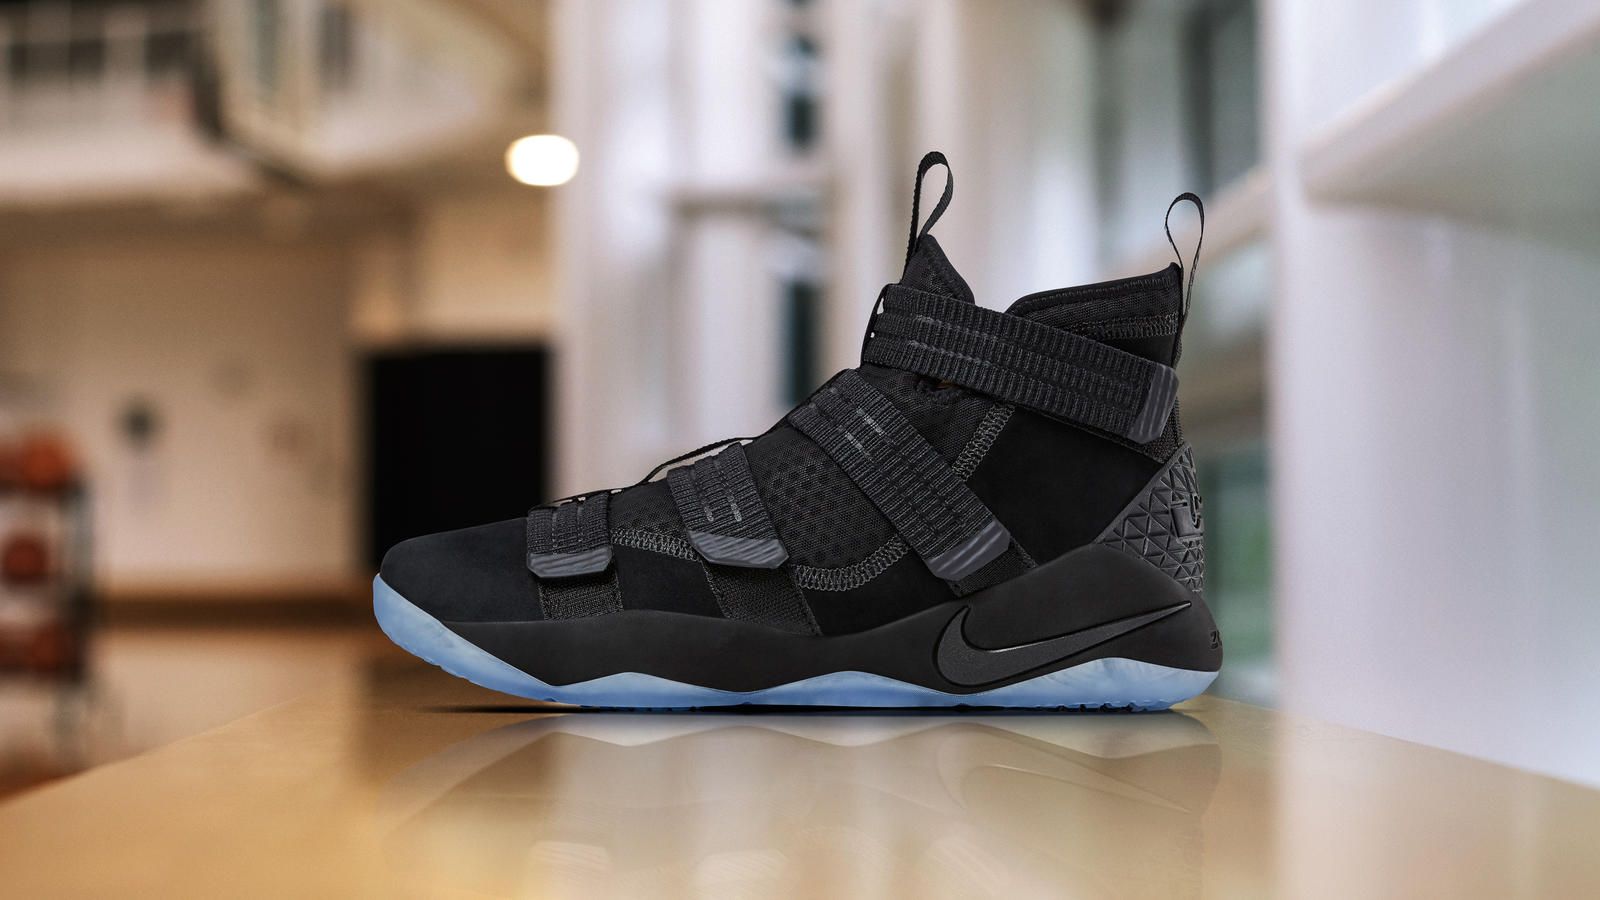 Get an Official Look at the Nike Zoom LeBron Soldier 11 'Prototype